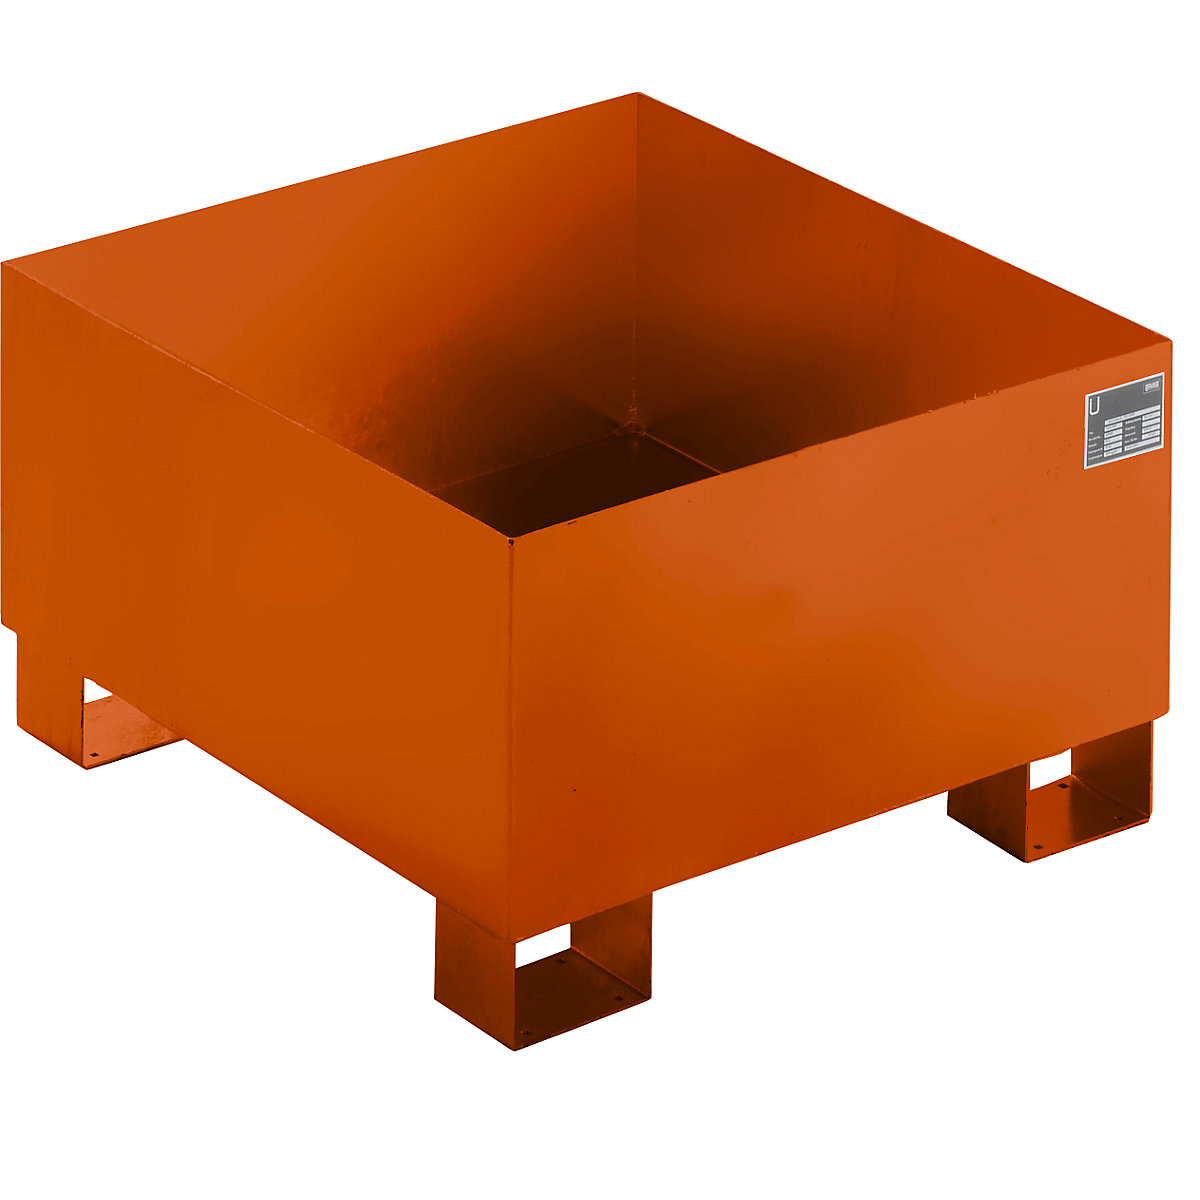 Sump tray made from sheet steel, LxWxH 800 x 800 x 465 mm, orange RAL 2000